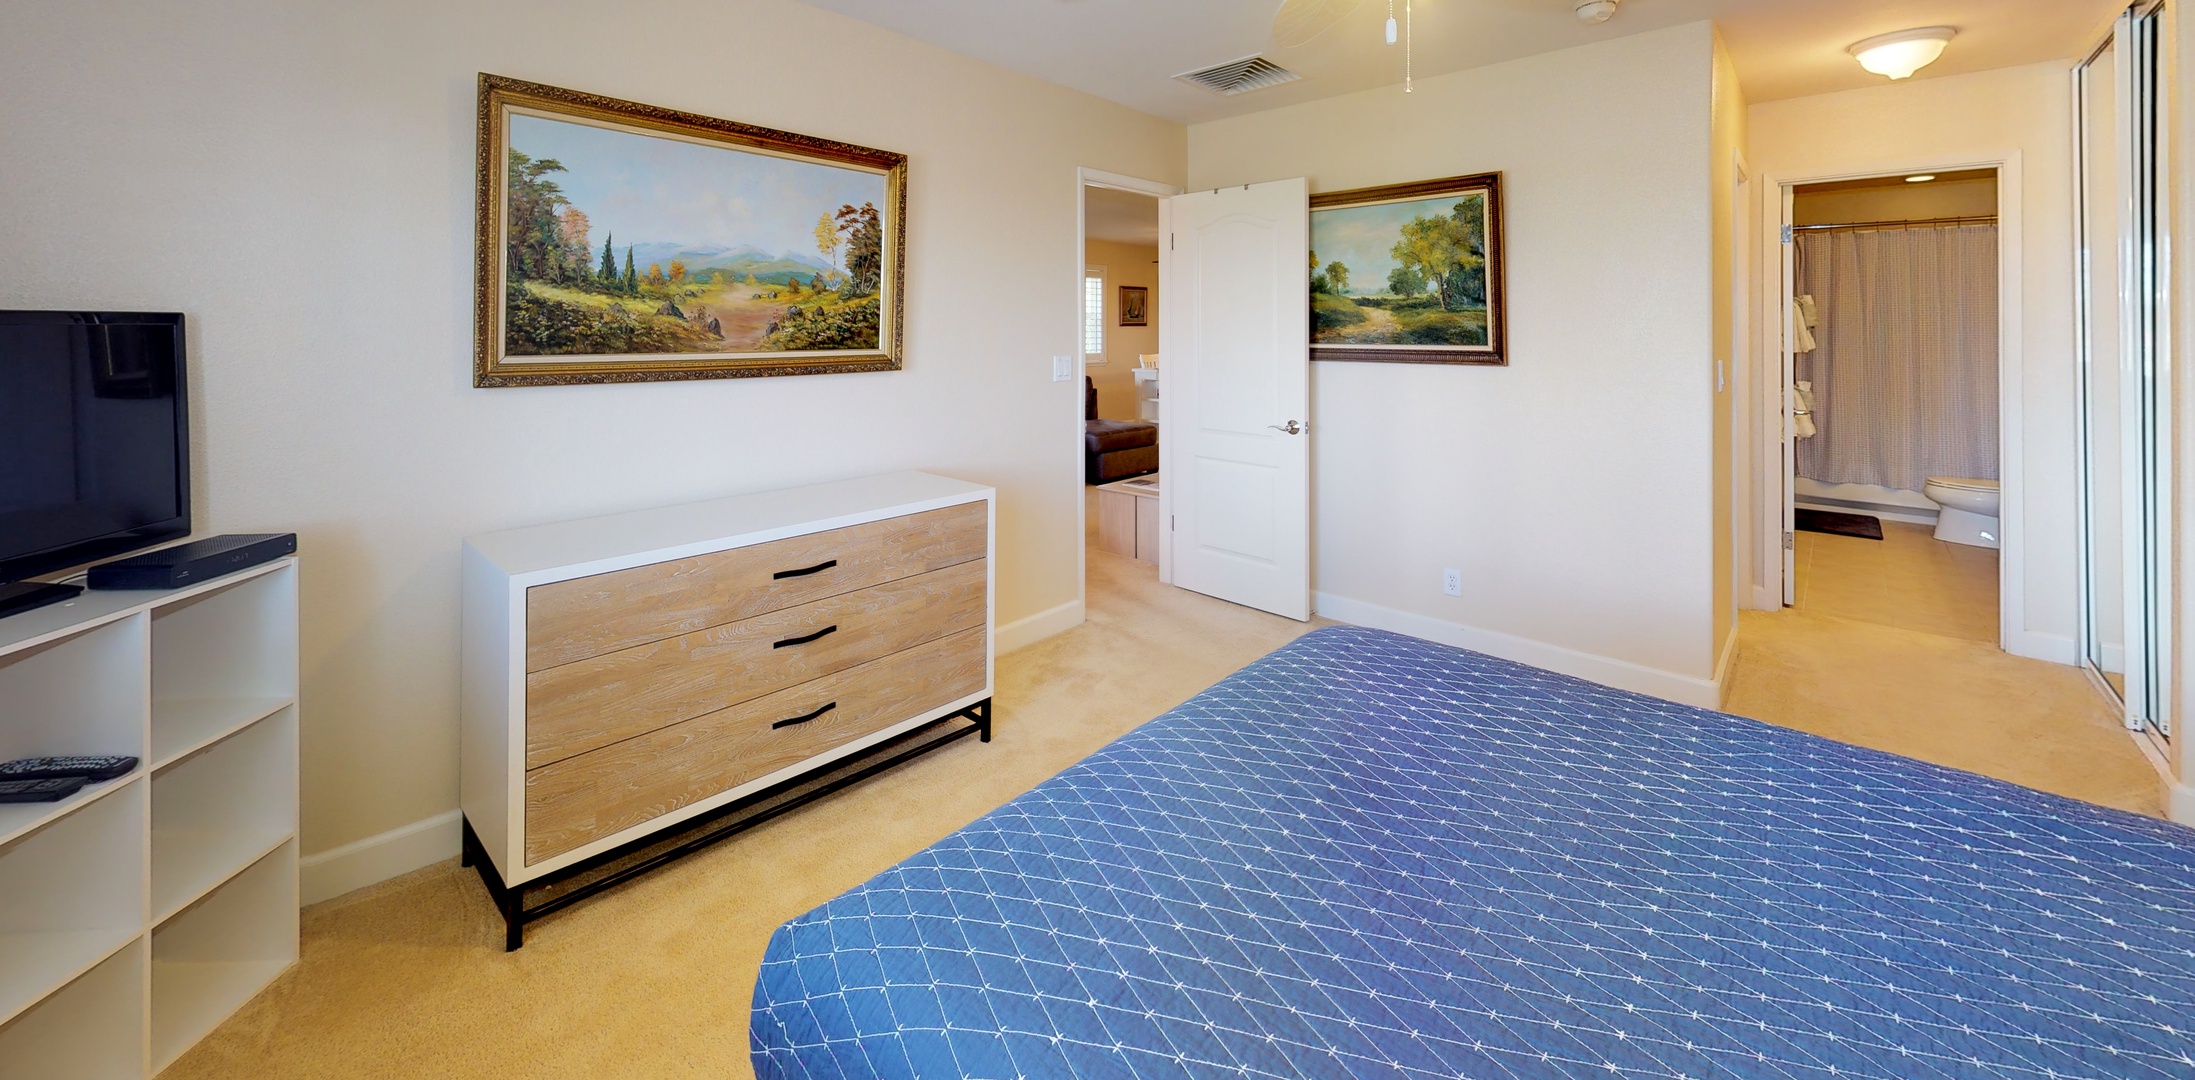 Kapolei Vacation Rentals, Ko Olina Kai 1065E - The primary guest bedroom with a dresser and ceiling fan.